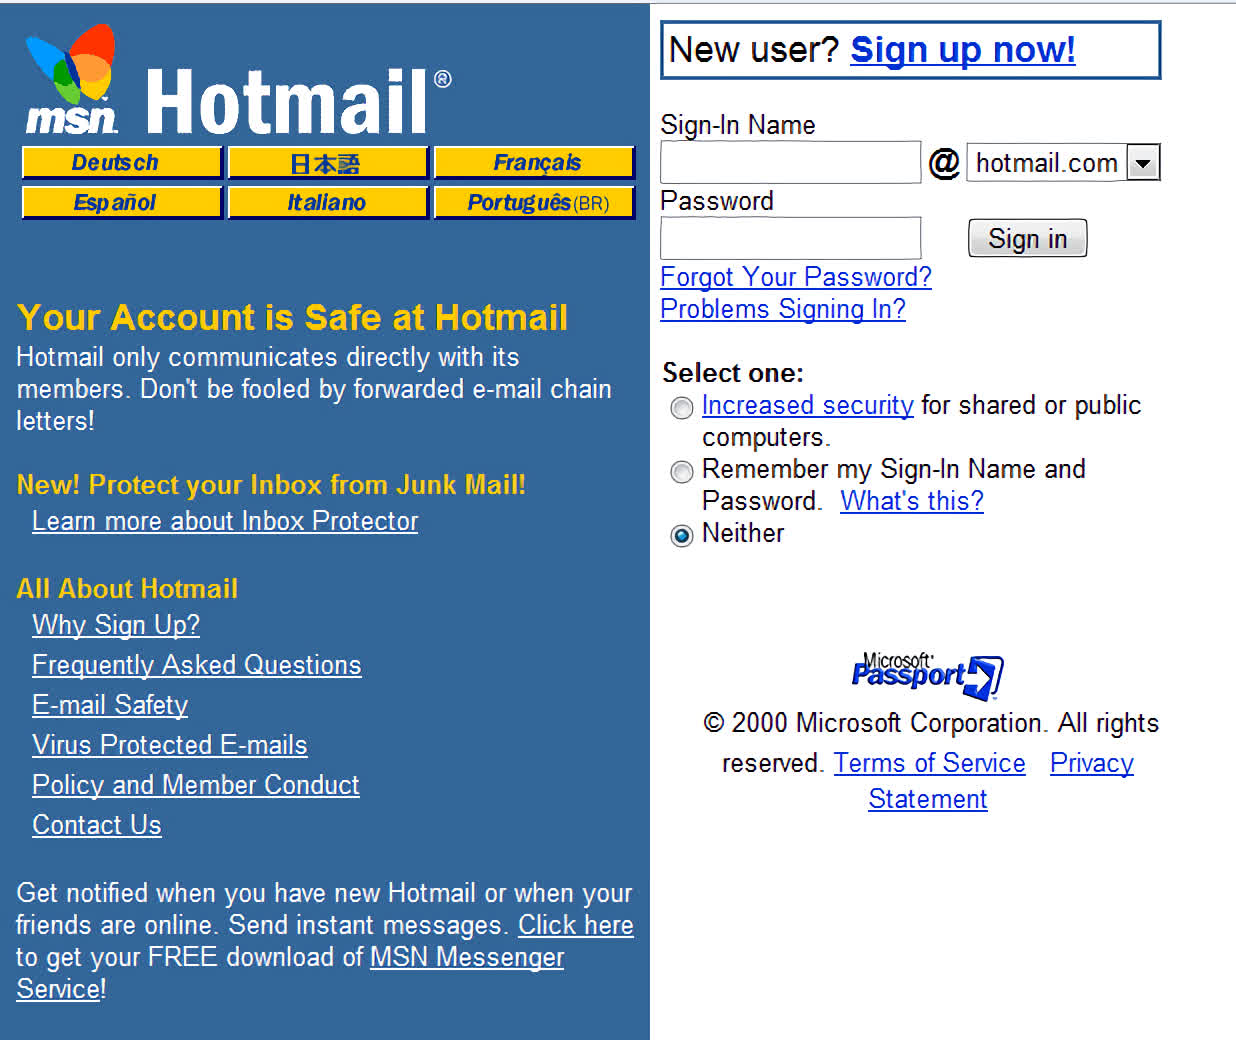 Hotmail Upgrade from